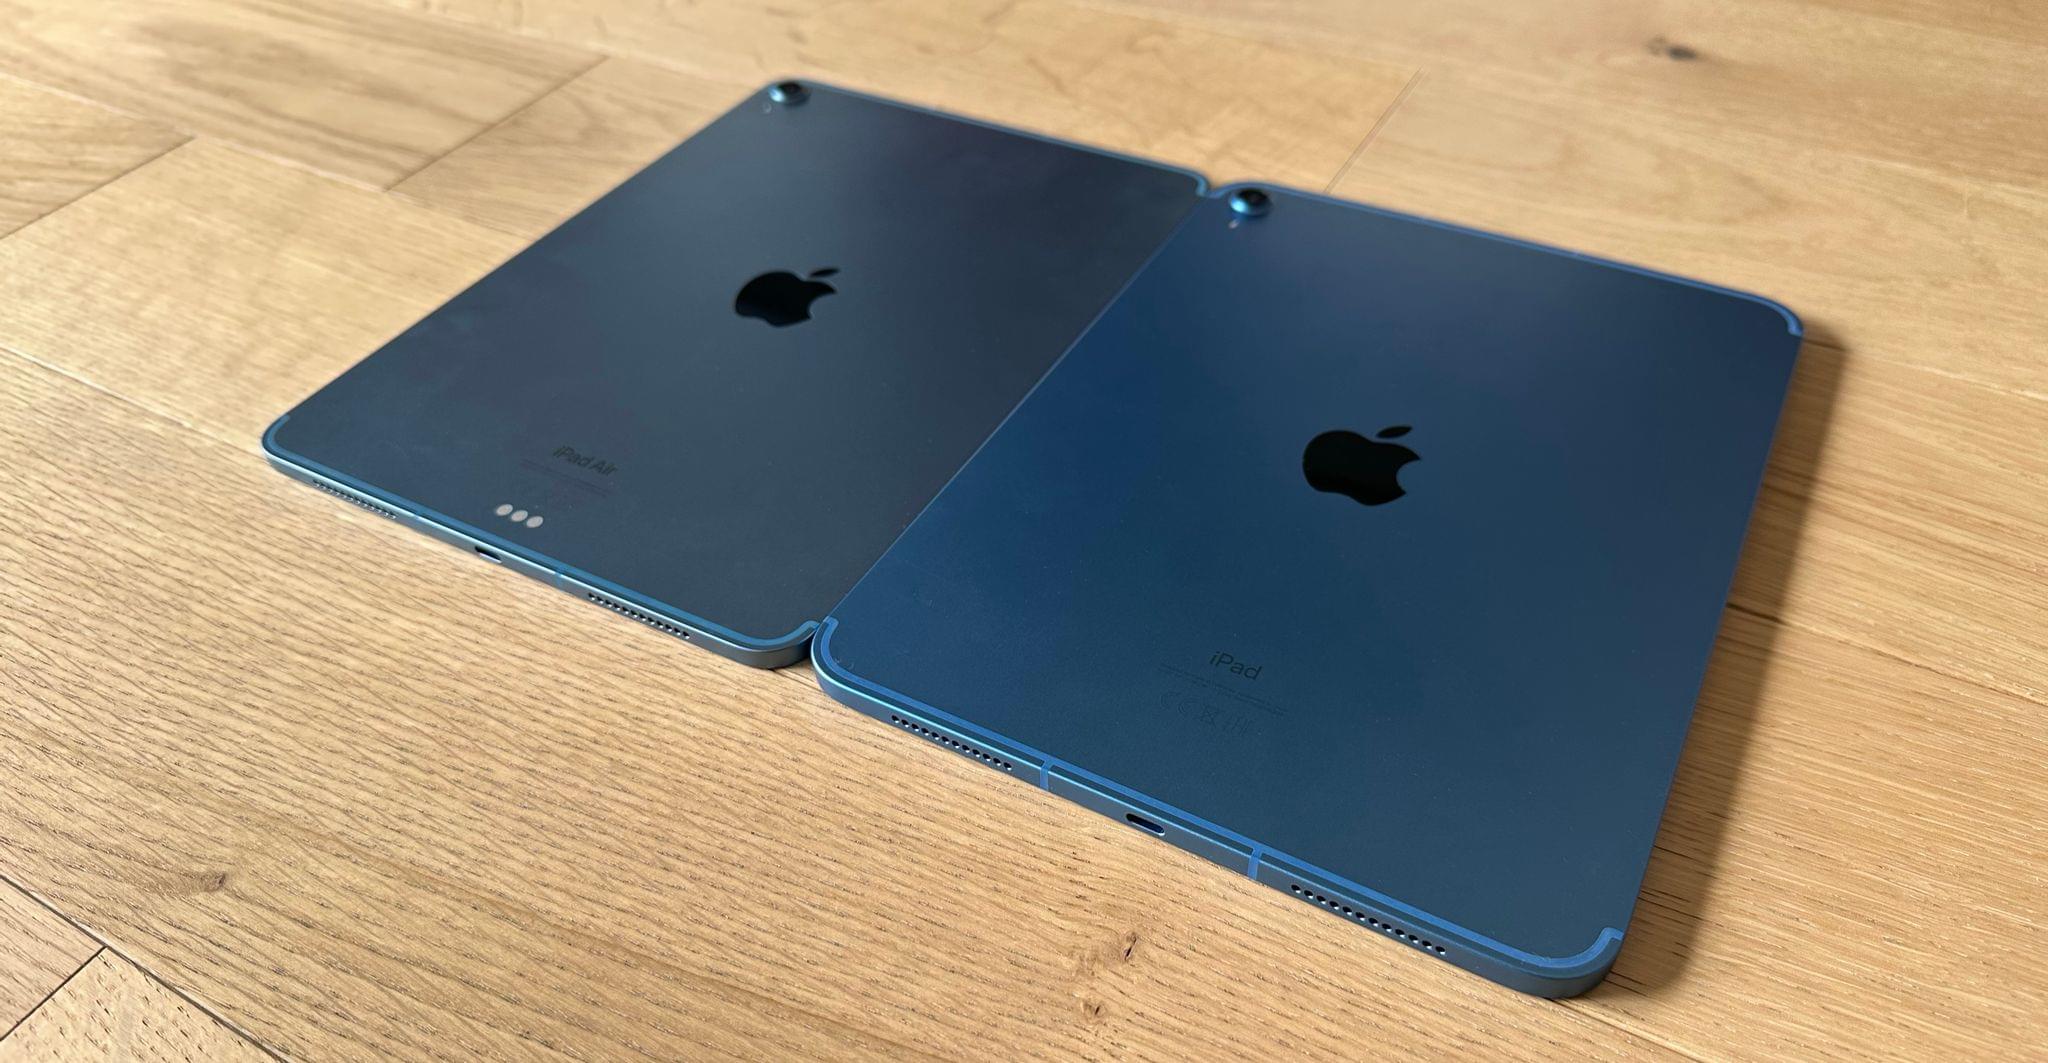 The new iPad (right) is a proper blue.